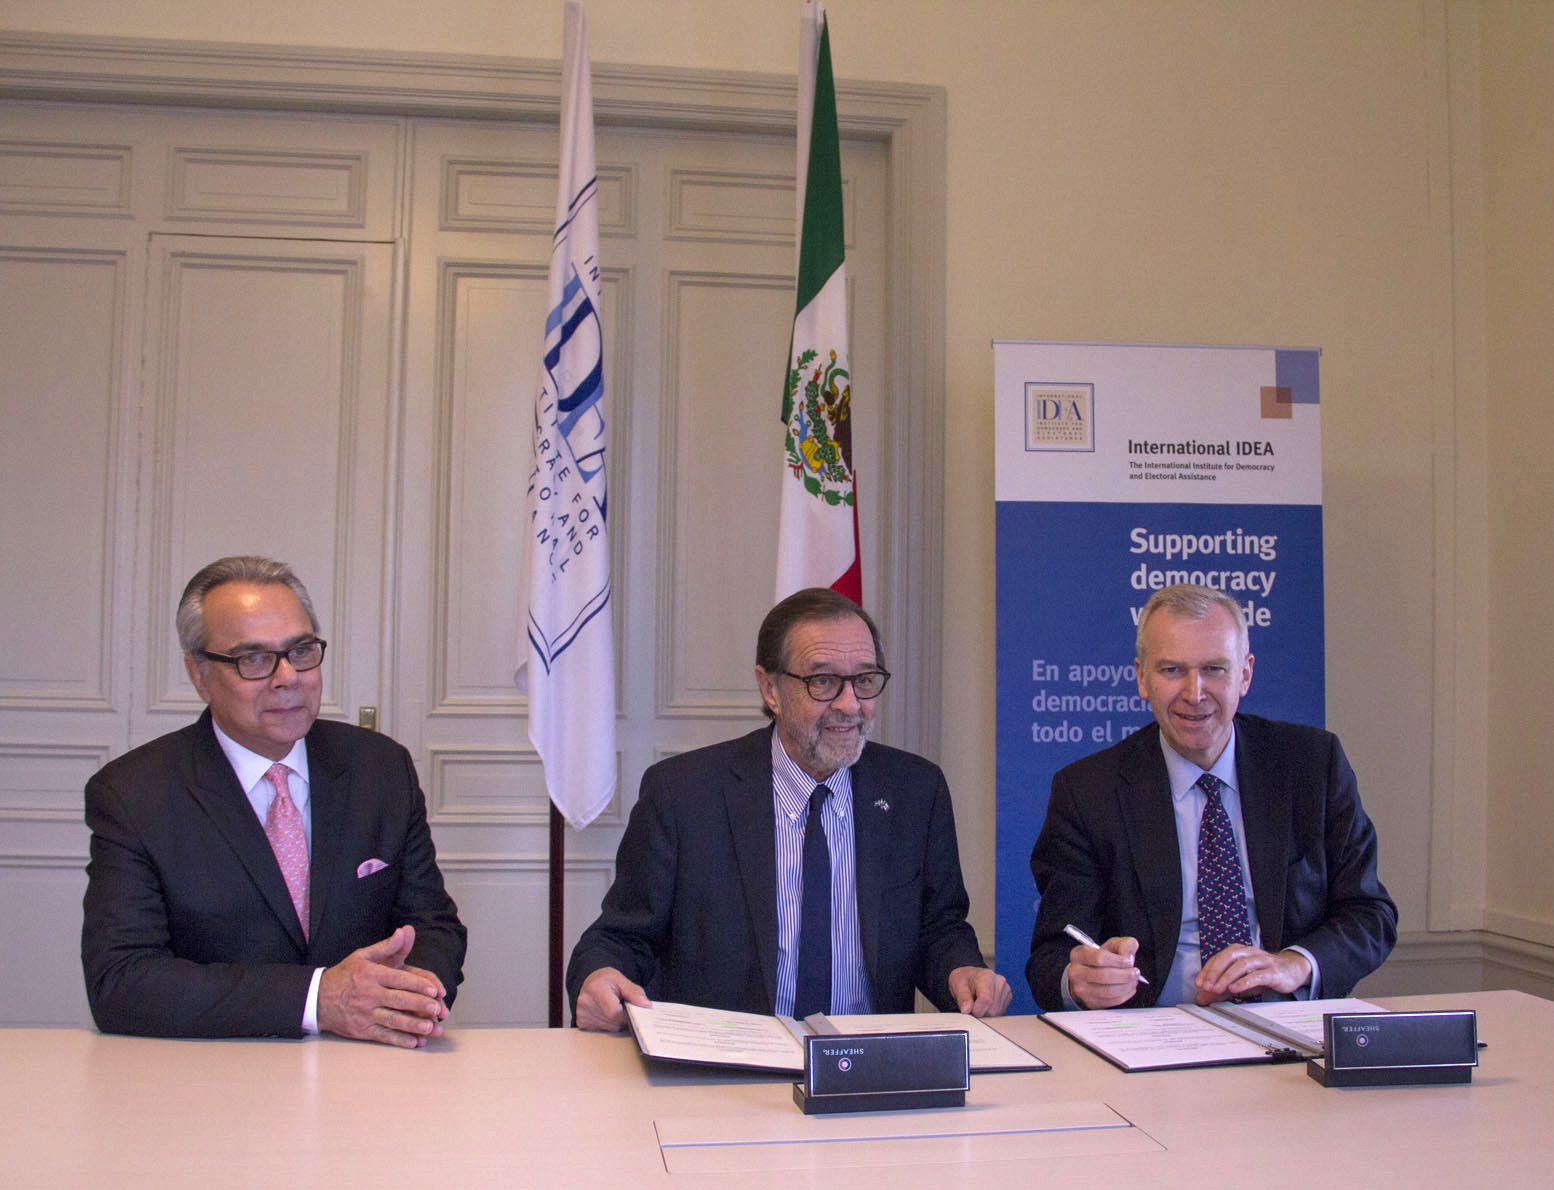 From left: Daniel Zovatto, International IDEA Regional Director for Latin America and the Caribbean; Agustín Gasca Pliego, Ambassador of Mexico to Sweden; and Yves Leterme, Secretary-General of International IDEA at a signing ceremony between Mexico and International IDEA on10 OCtober 2017.